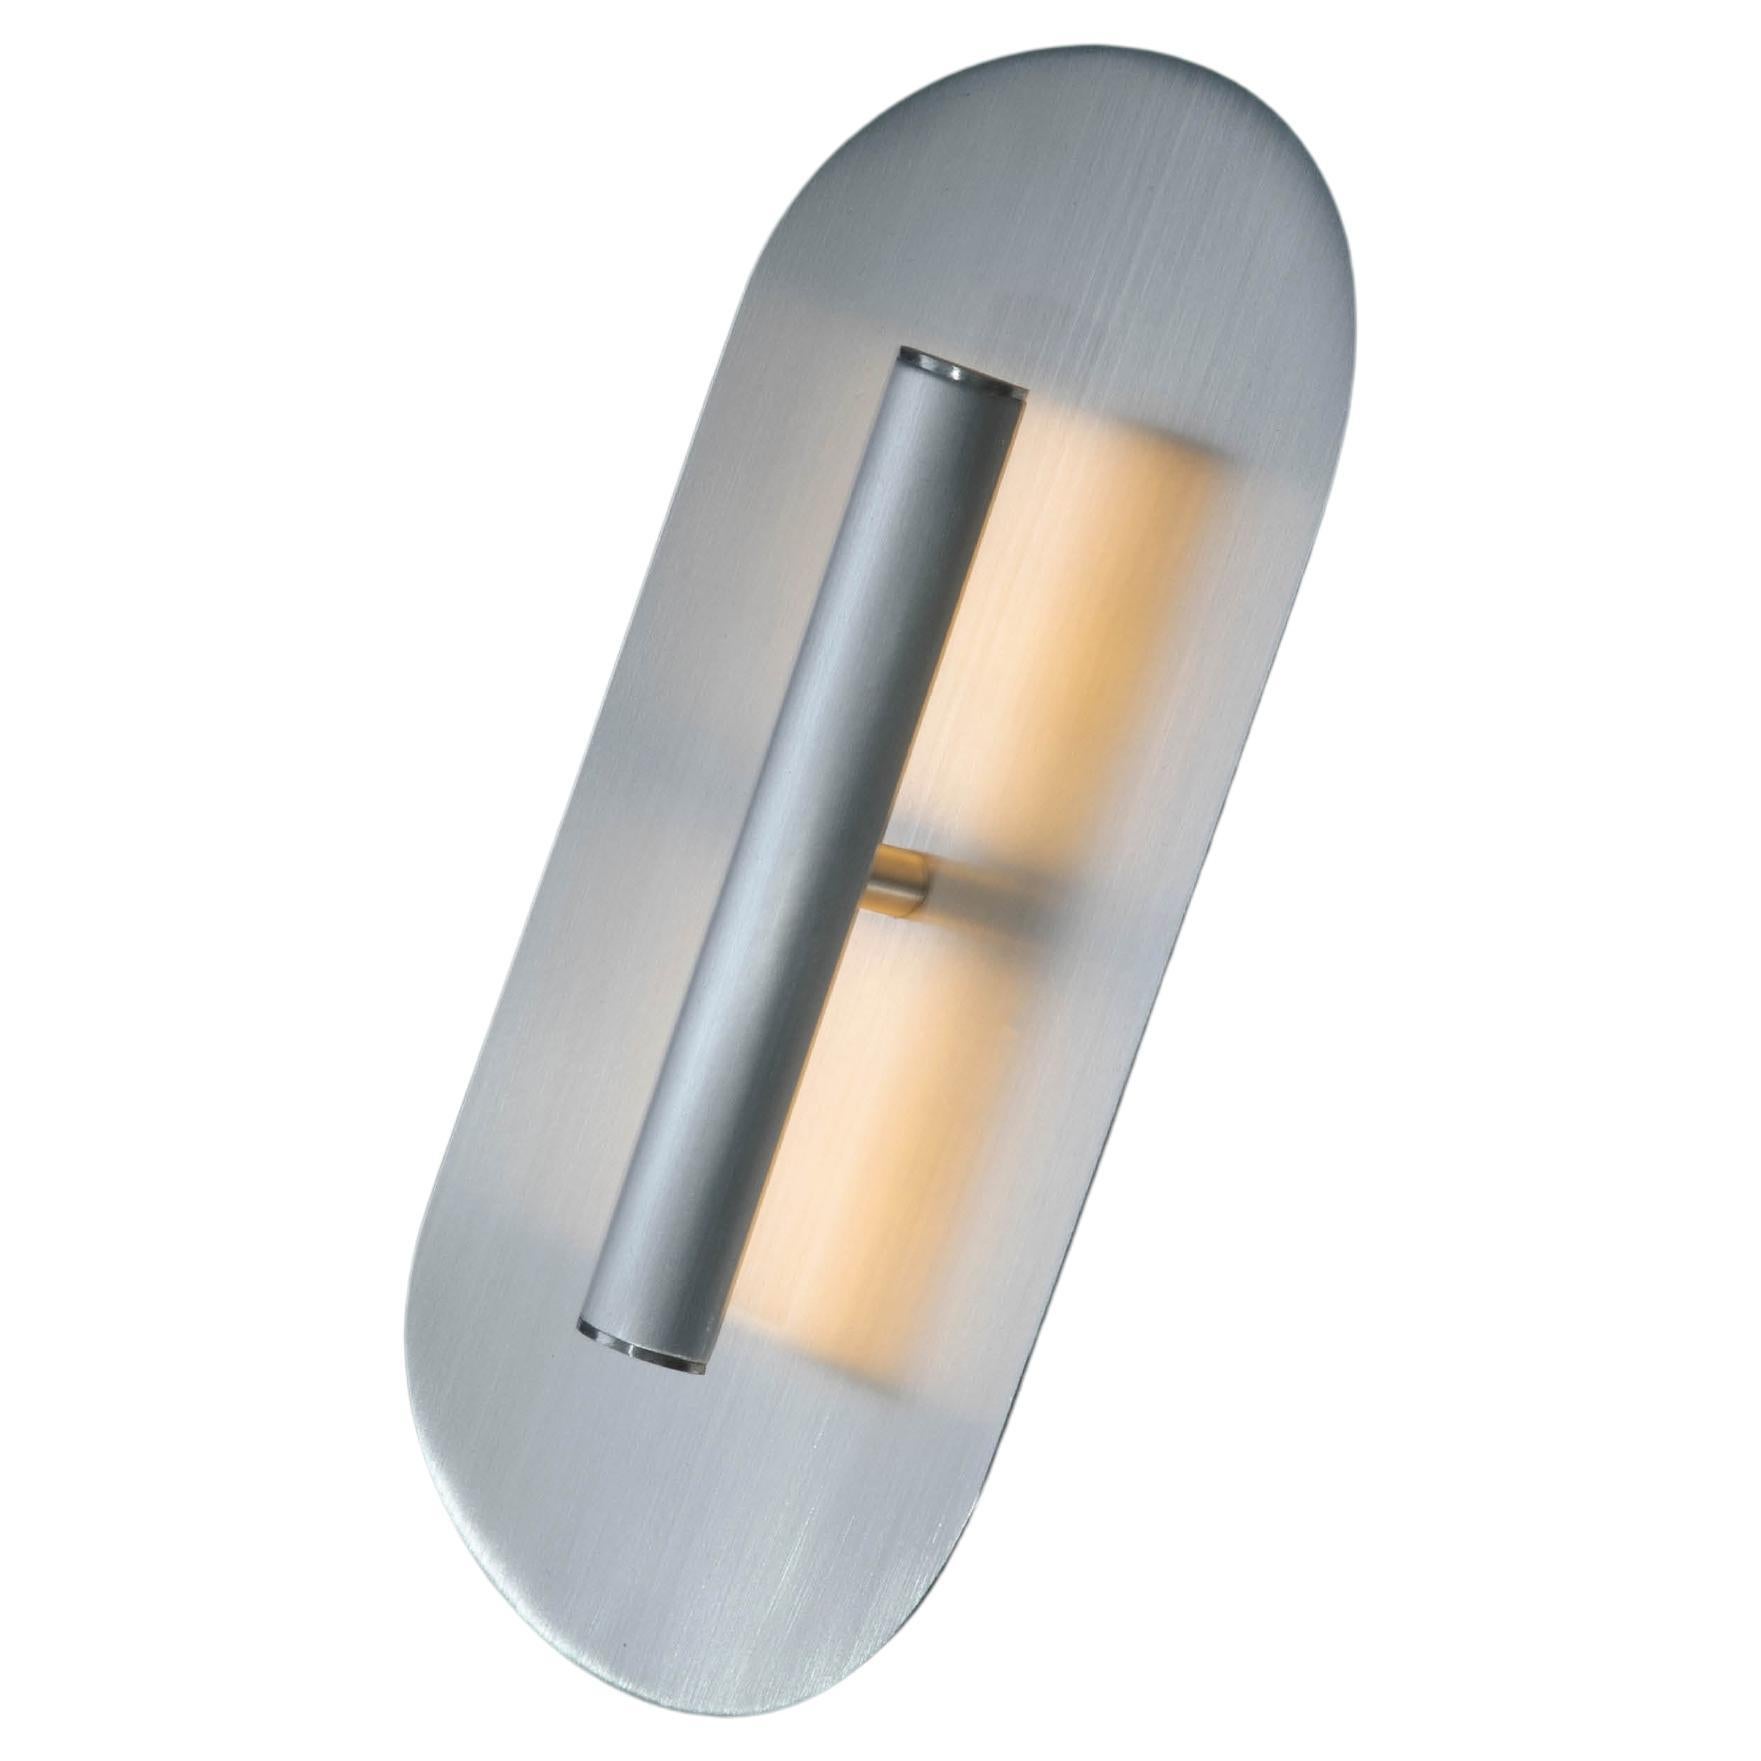 Reflector Wall Sconce 300, LED Light Fixture, Raw Brushed Aluminum Metal